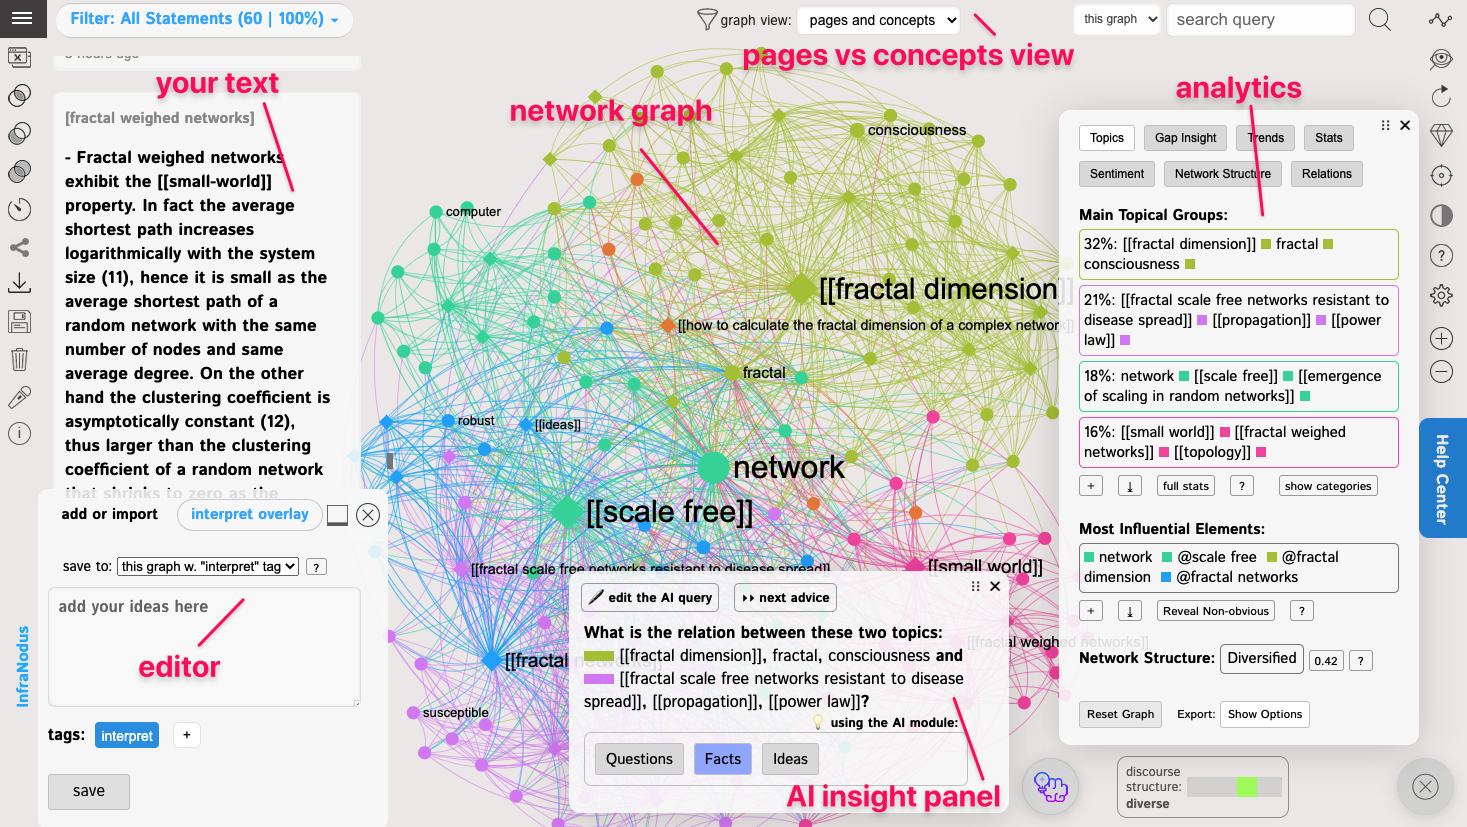 knowledge-graph-visualization-pkm.png